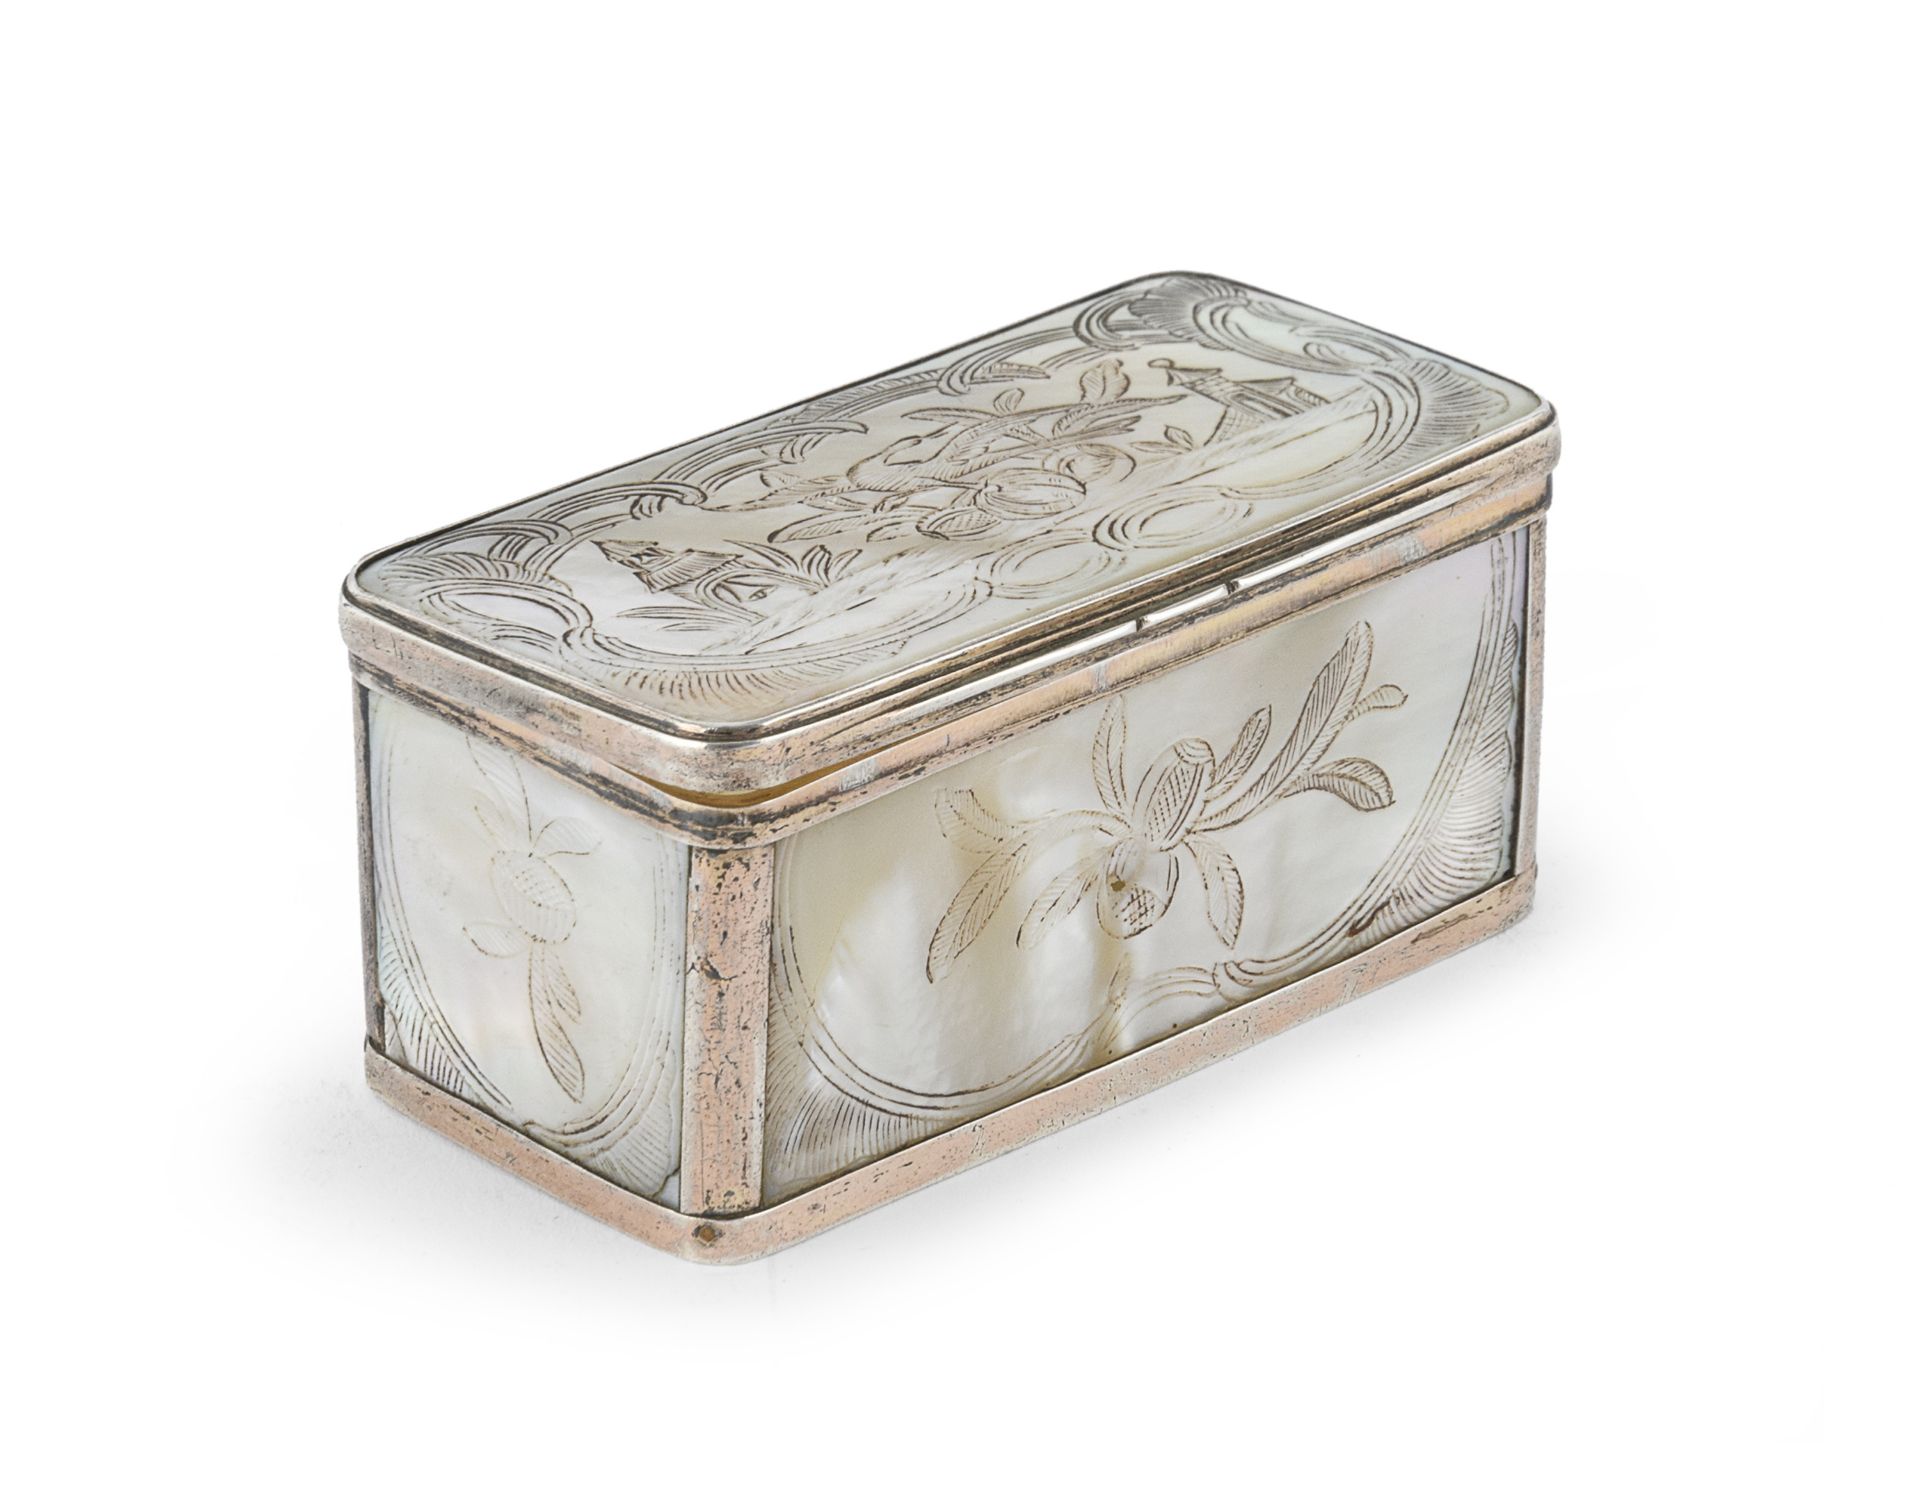 GILT METAL AND MOTHER OF PEARL BOX EARLY 19TH CENTURY